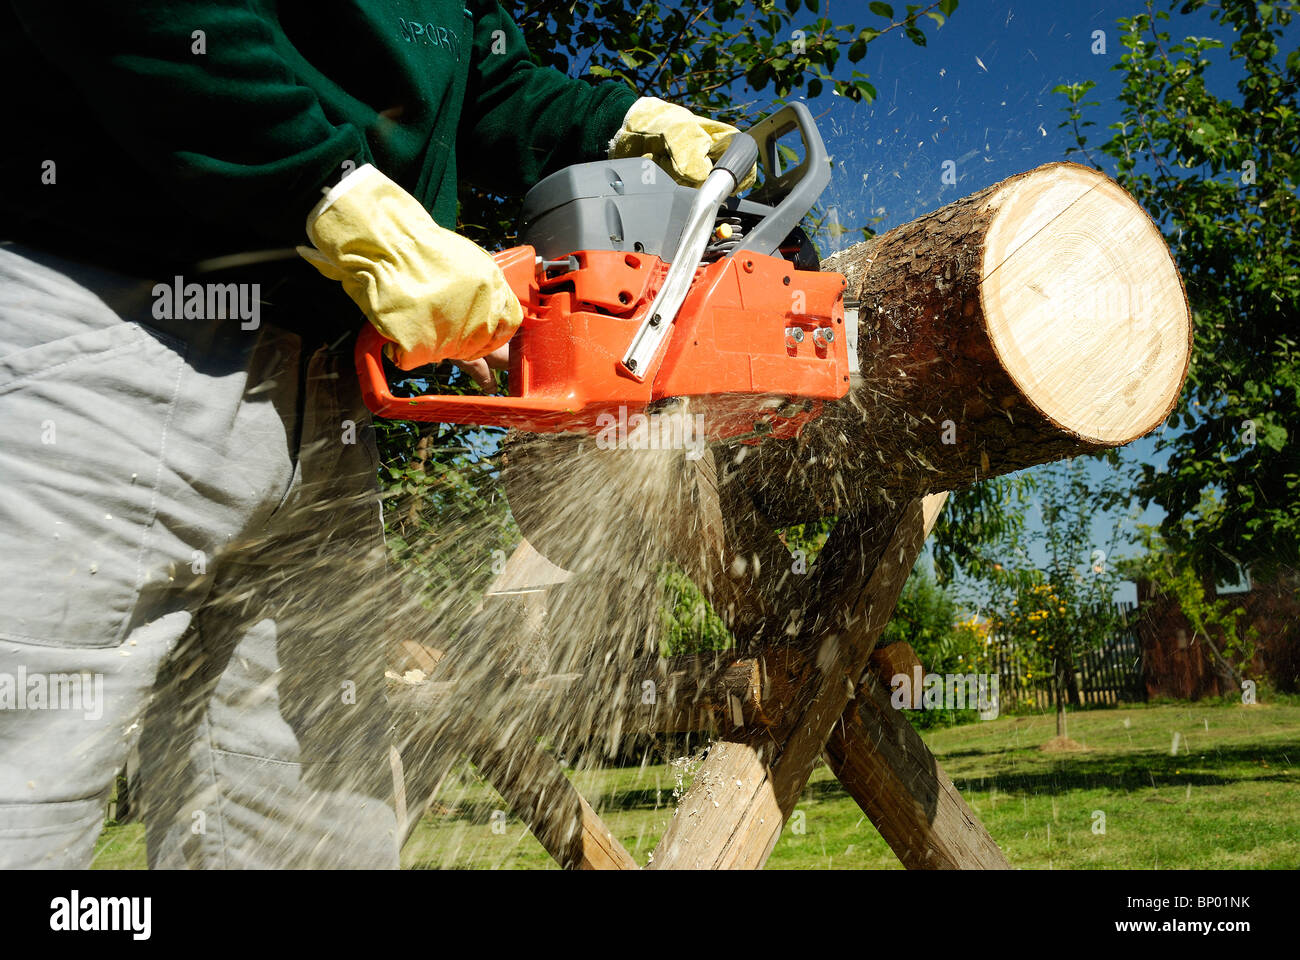 The chainsaw cutting the log of wood Stock Photo